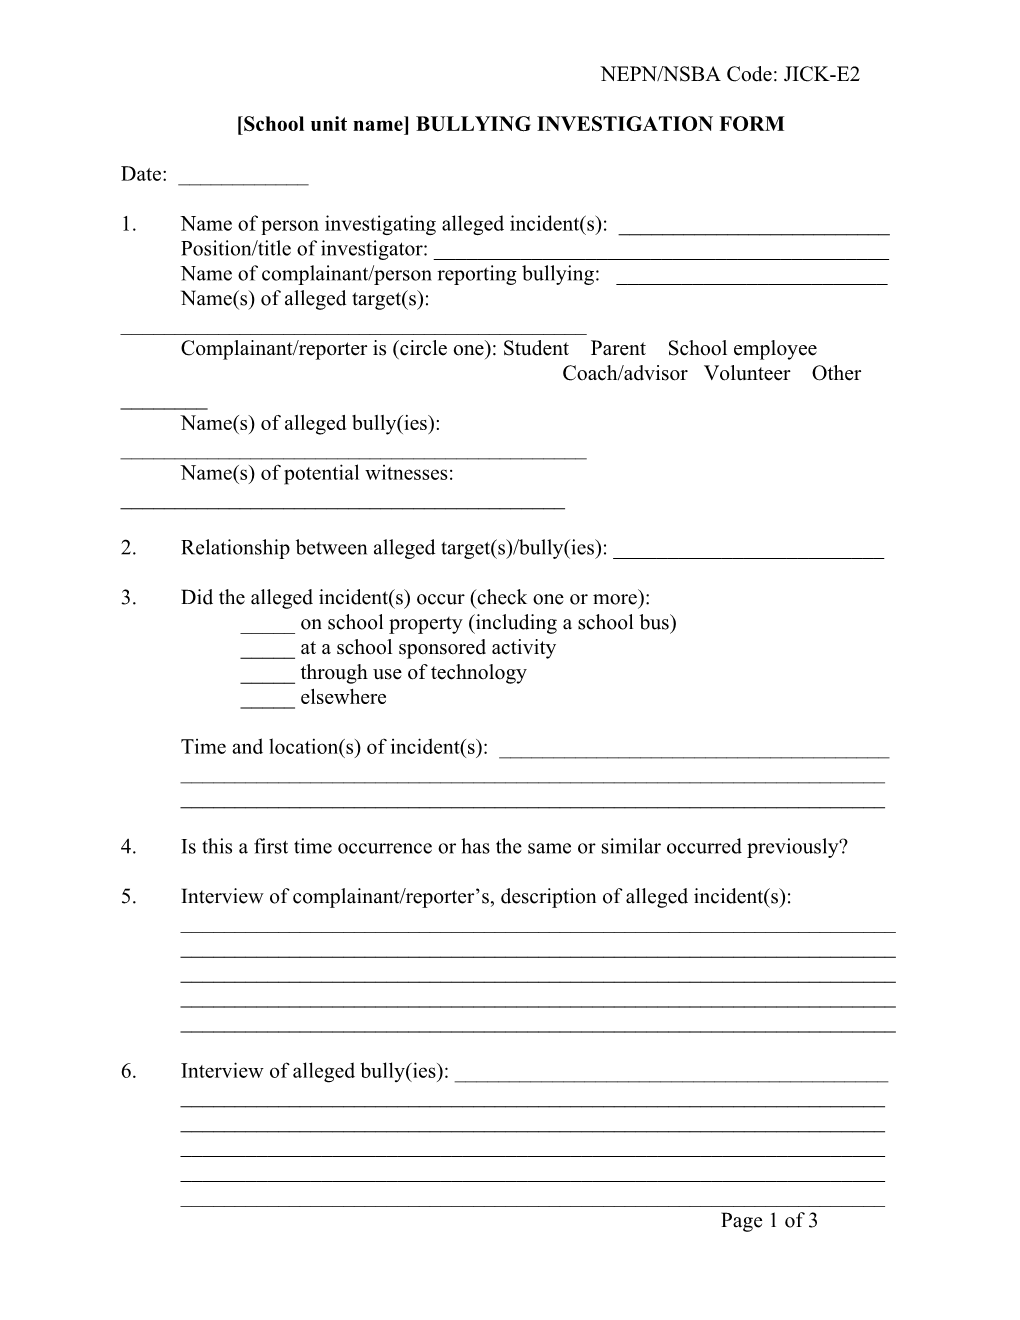 School Unit Name BULLYING INVESTIGATION FORM